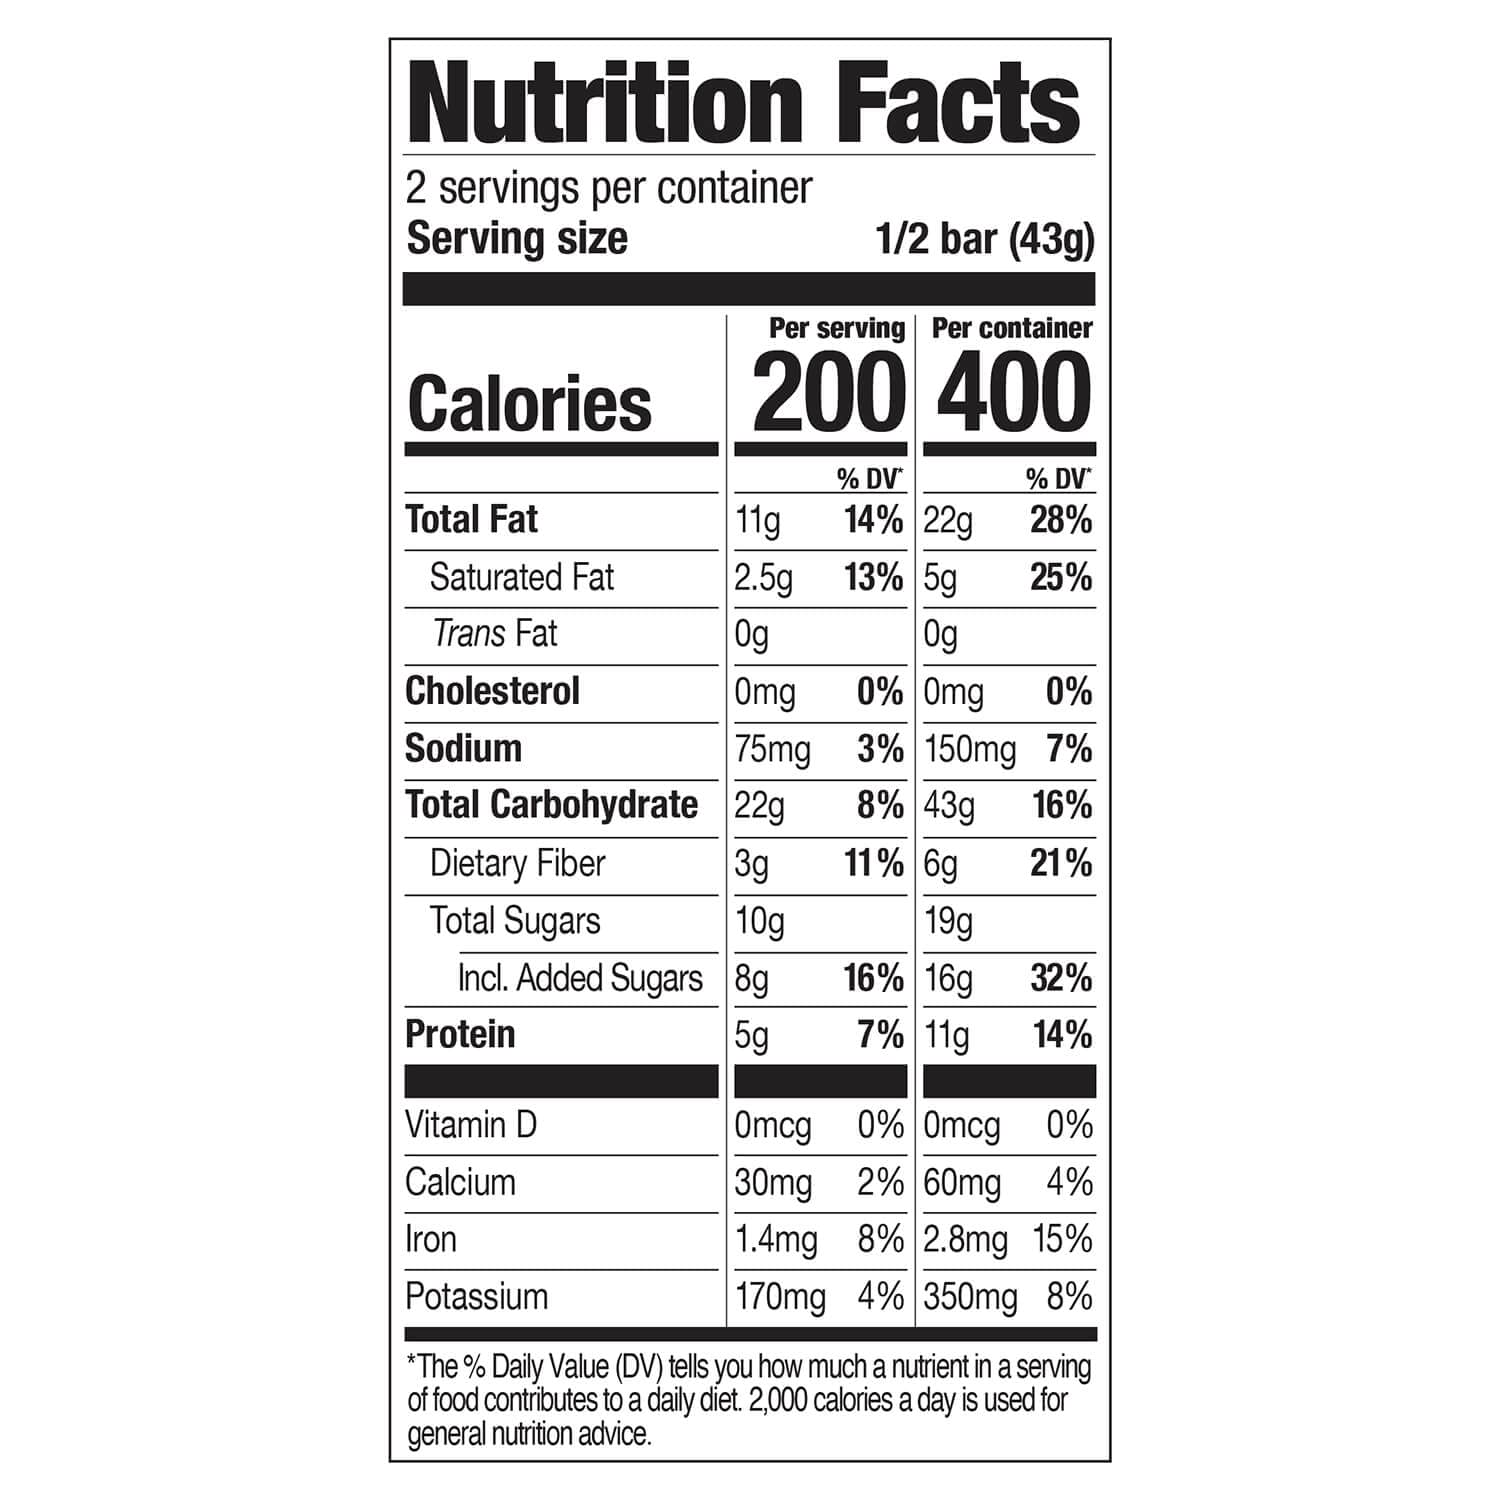 PROBAR - Meal Bar, Peanut Butter Chocolate Chip, Non-GMO, Gluten-Free, Healthy, Plant-Based Whole Food Ingredients, Natural Energy (12 Count)